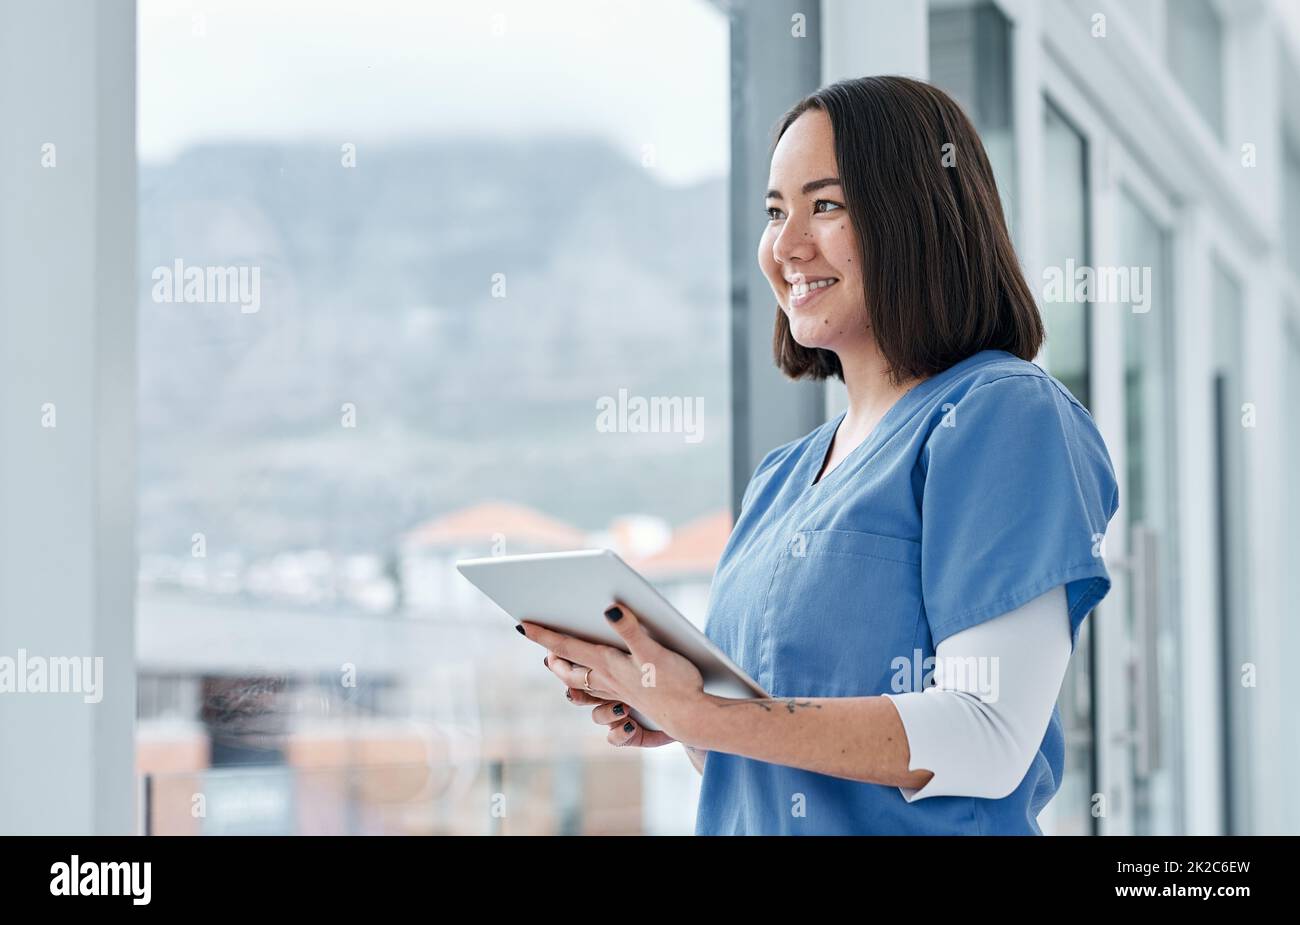 Facilitating effective data management with smart tech. Shot of a medical practitioner using a digital tablet in a hospital. Stock Photo